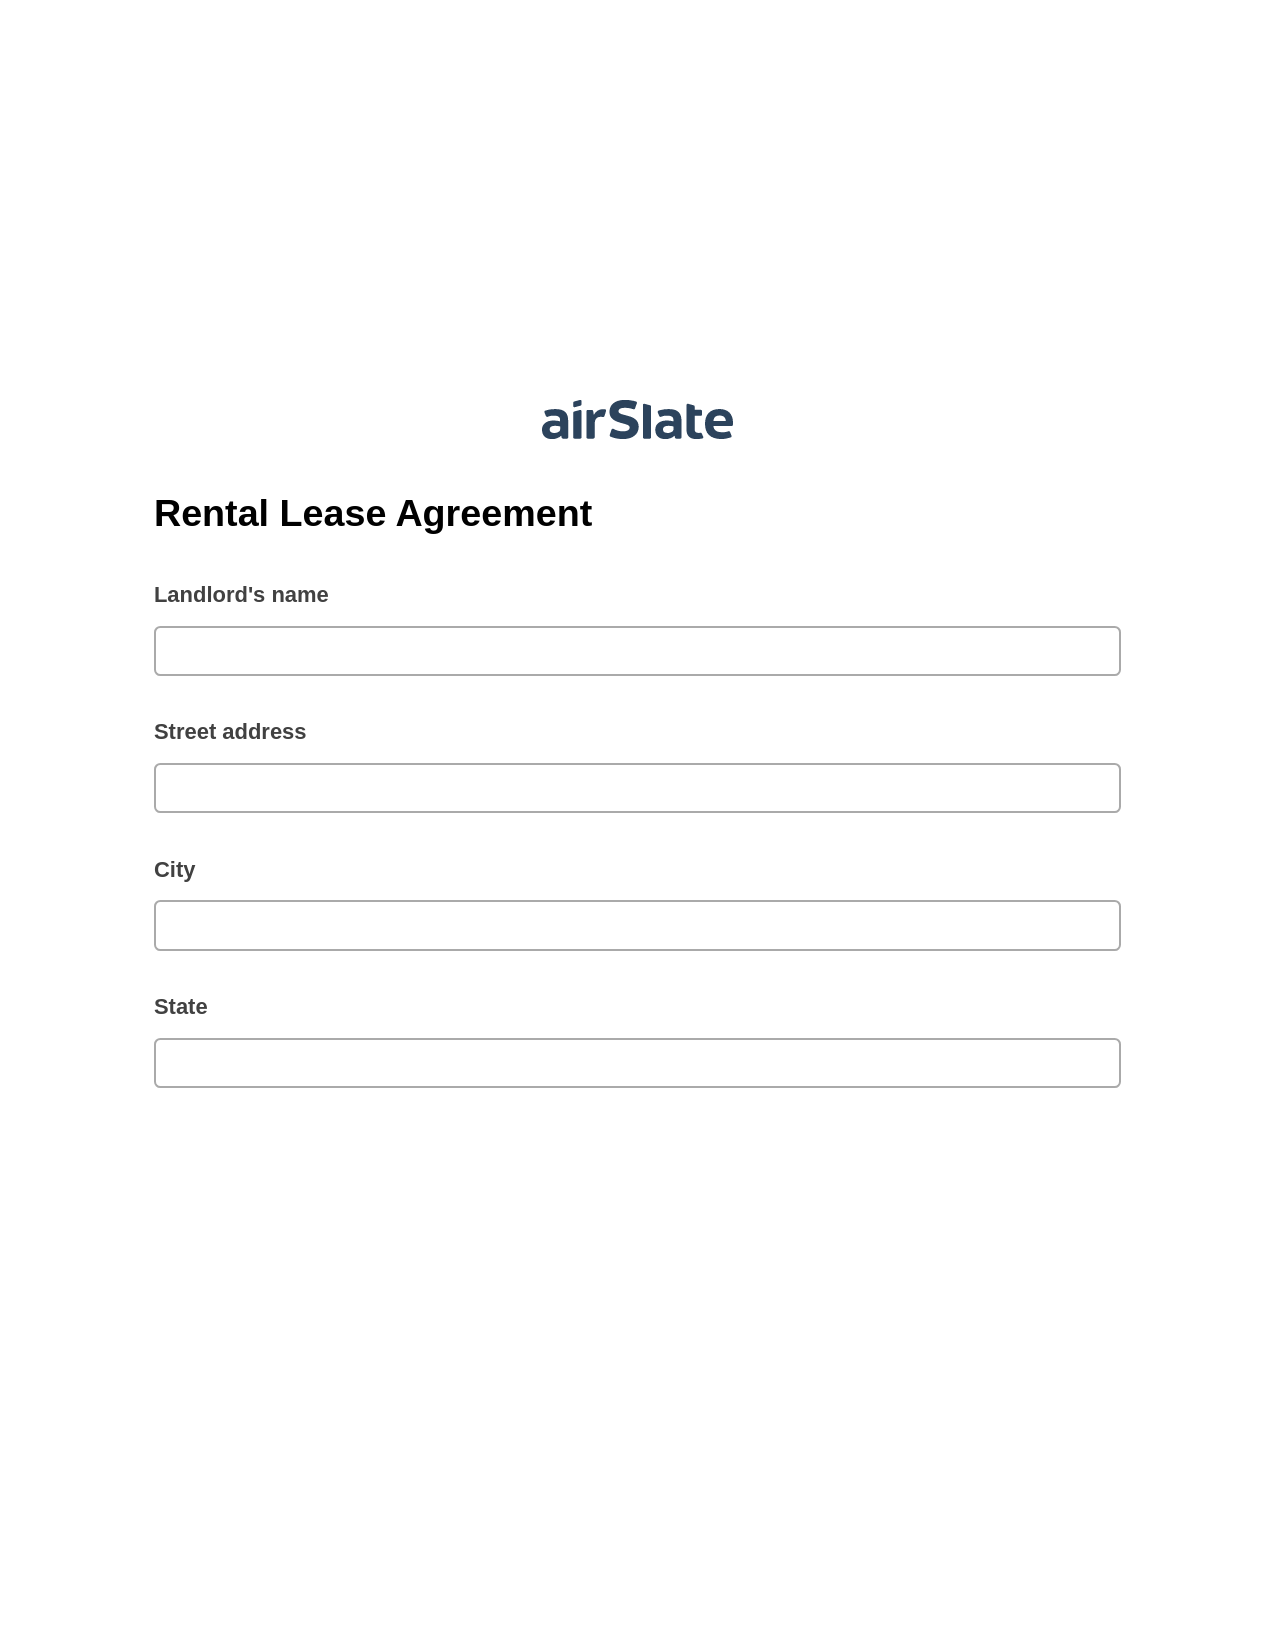 Rental Lease Agreement Pre-fill from another Slate Bot, Jira Bot, Export to Google Sheet Bot